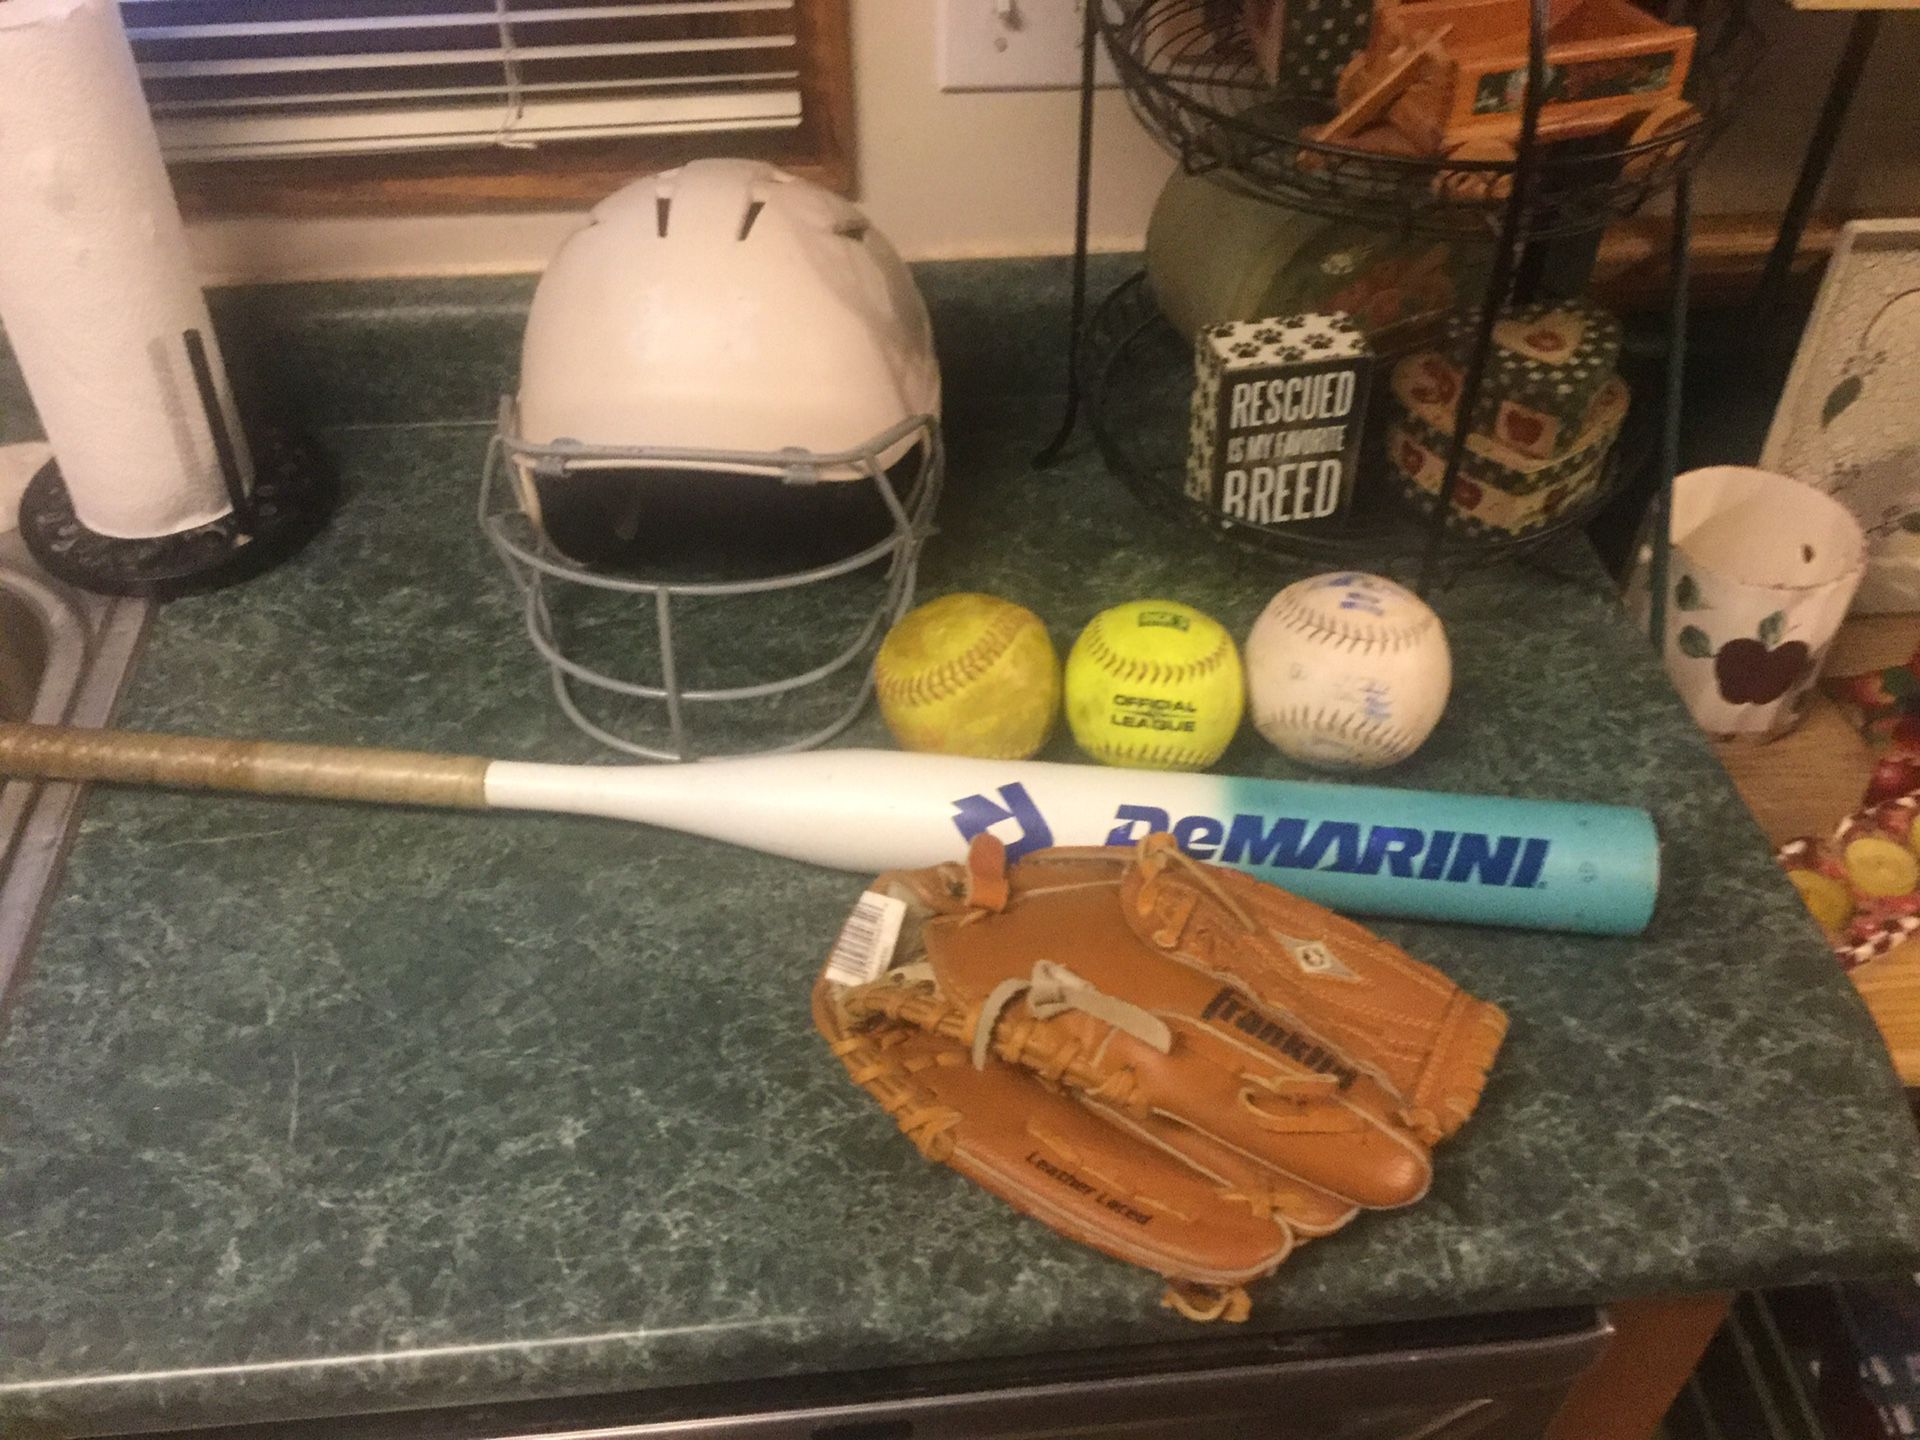 Softball package including a like new Franklin 11” glove, DeMarini softball bat 32” 21 ounce, Under Armour batting helmet with front cage and 3 so